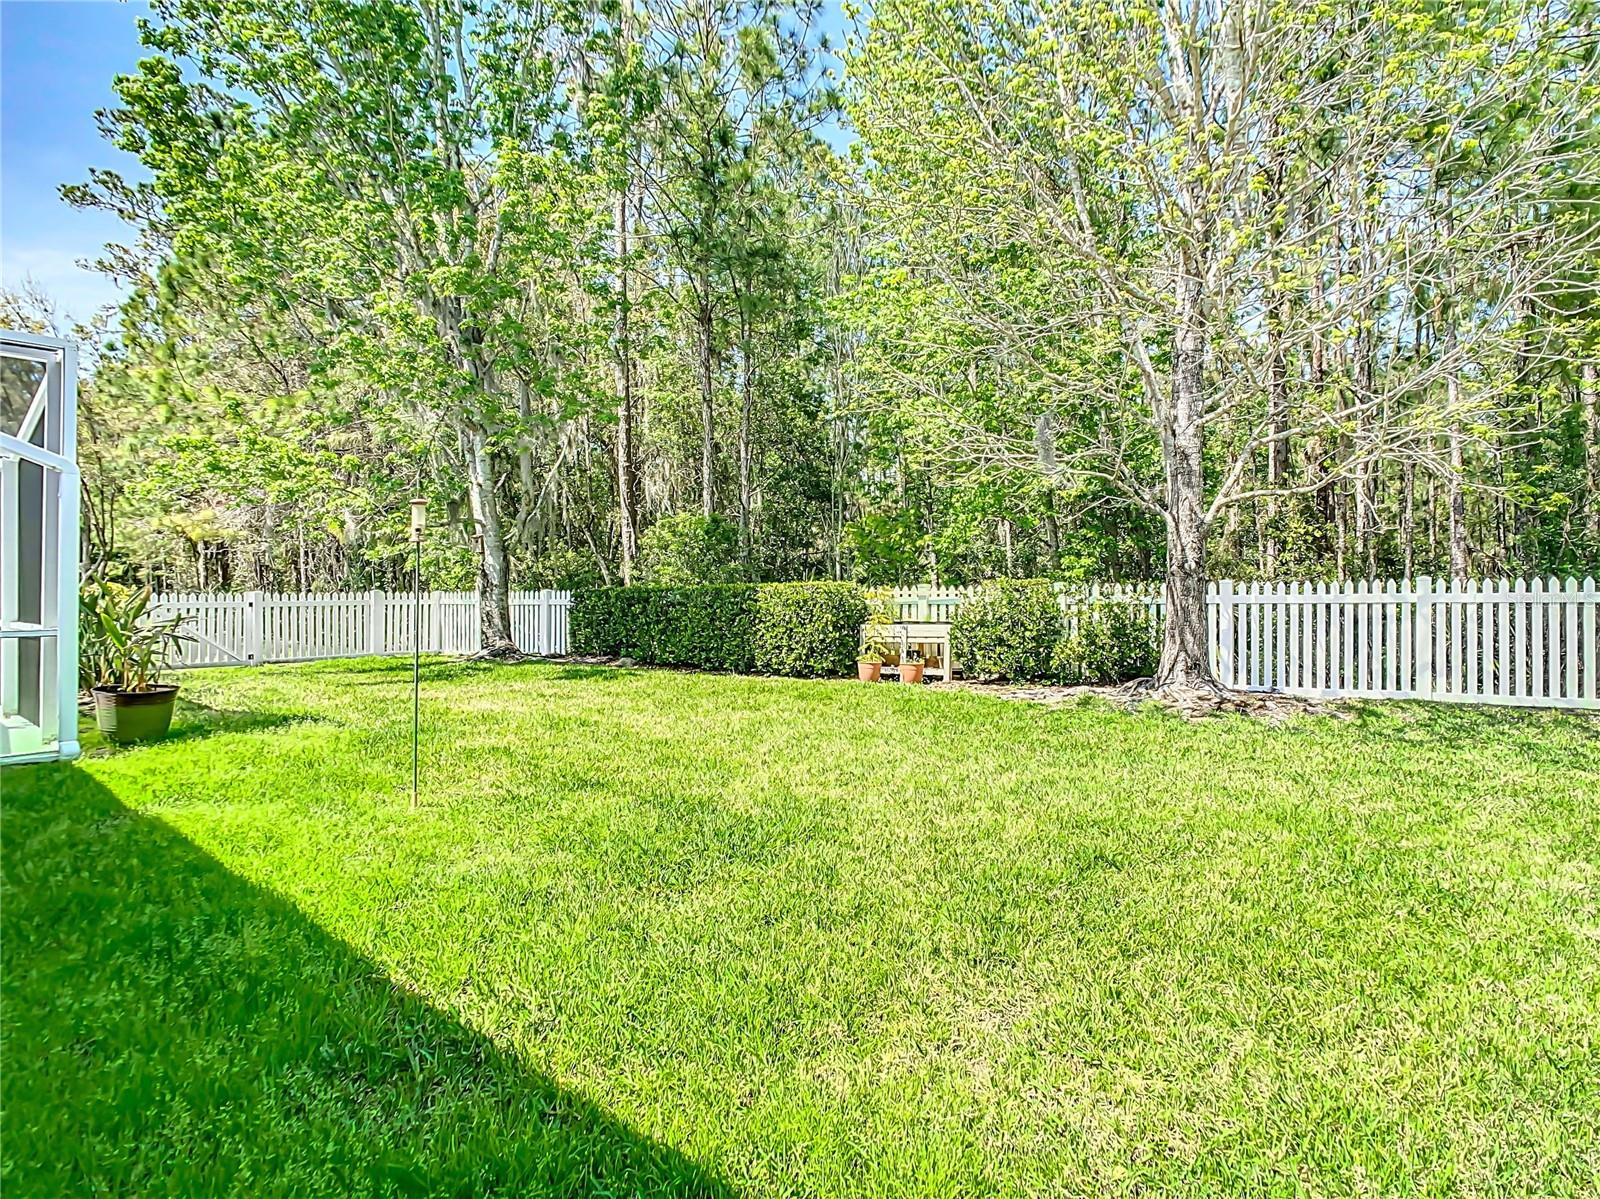 Tree lined back yard for total privacy